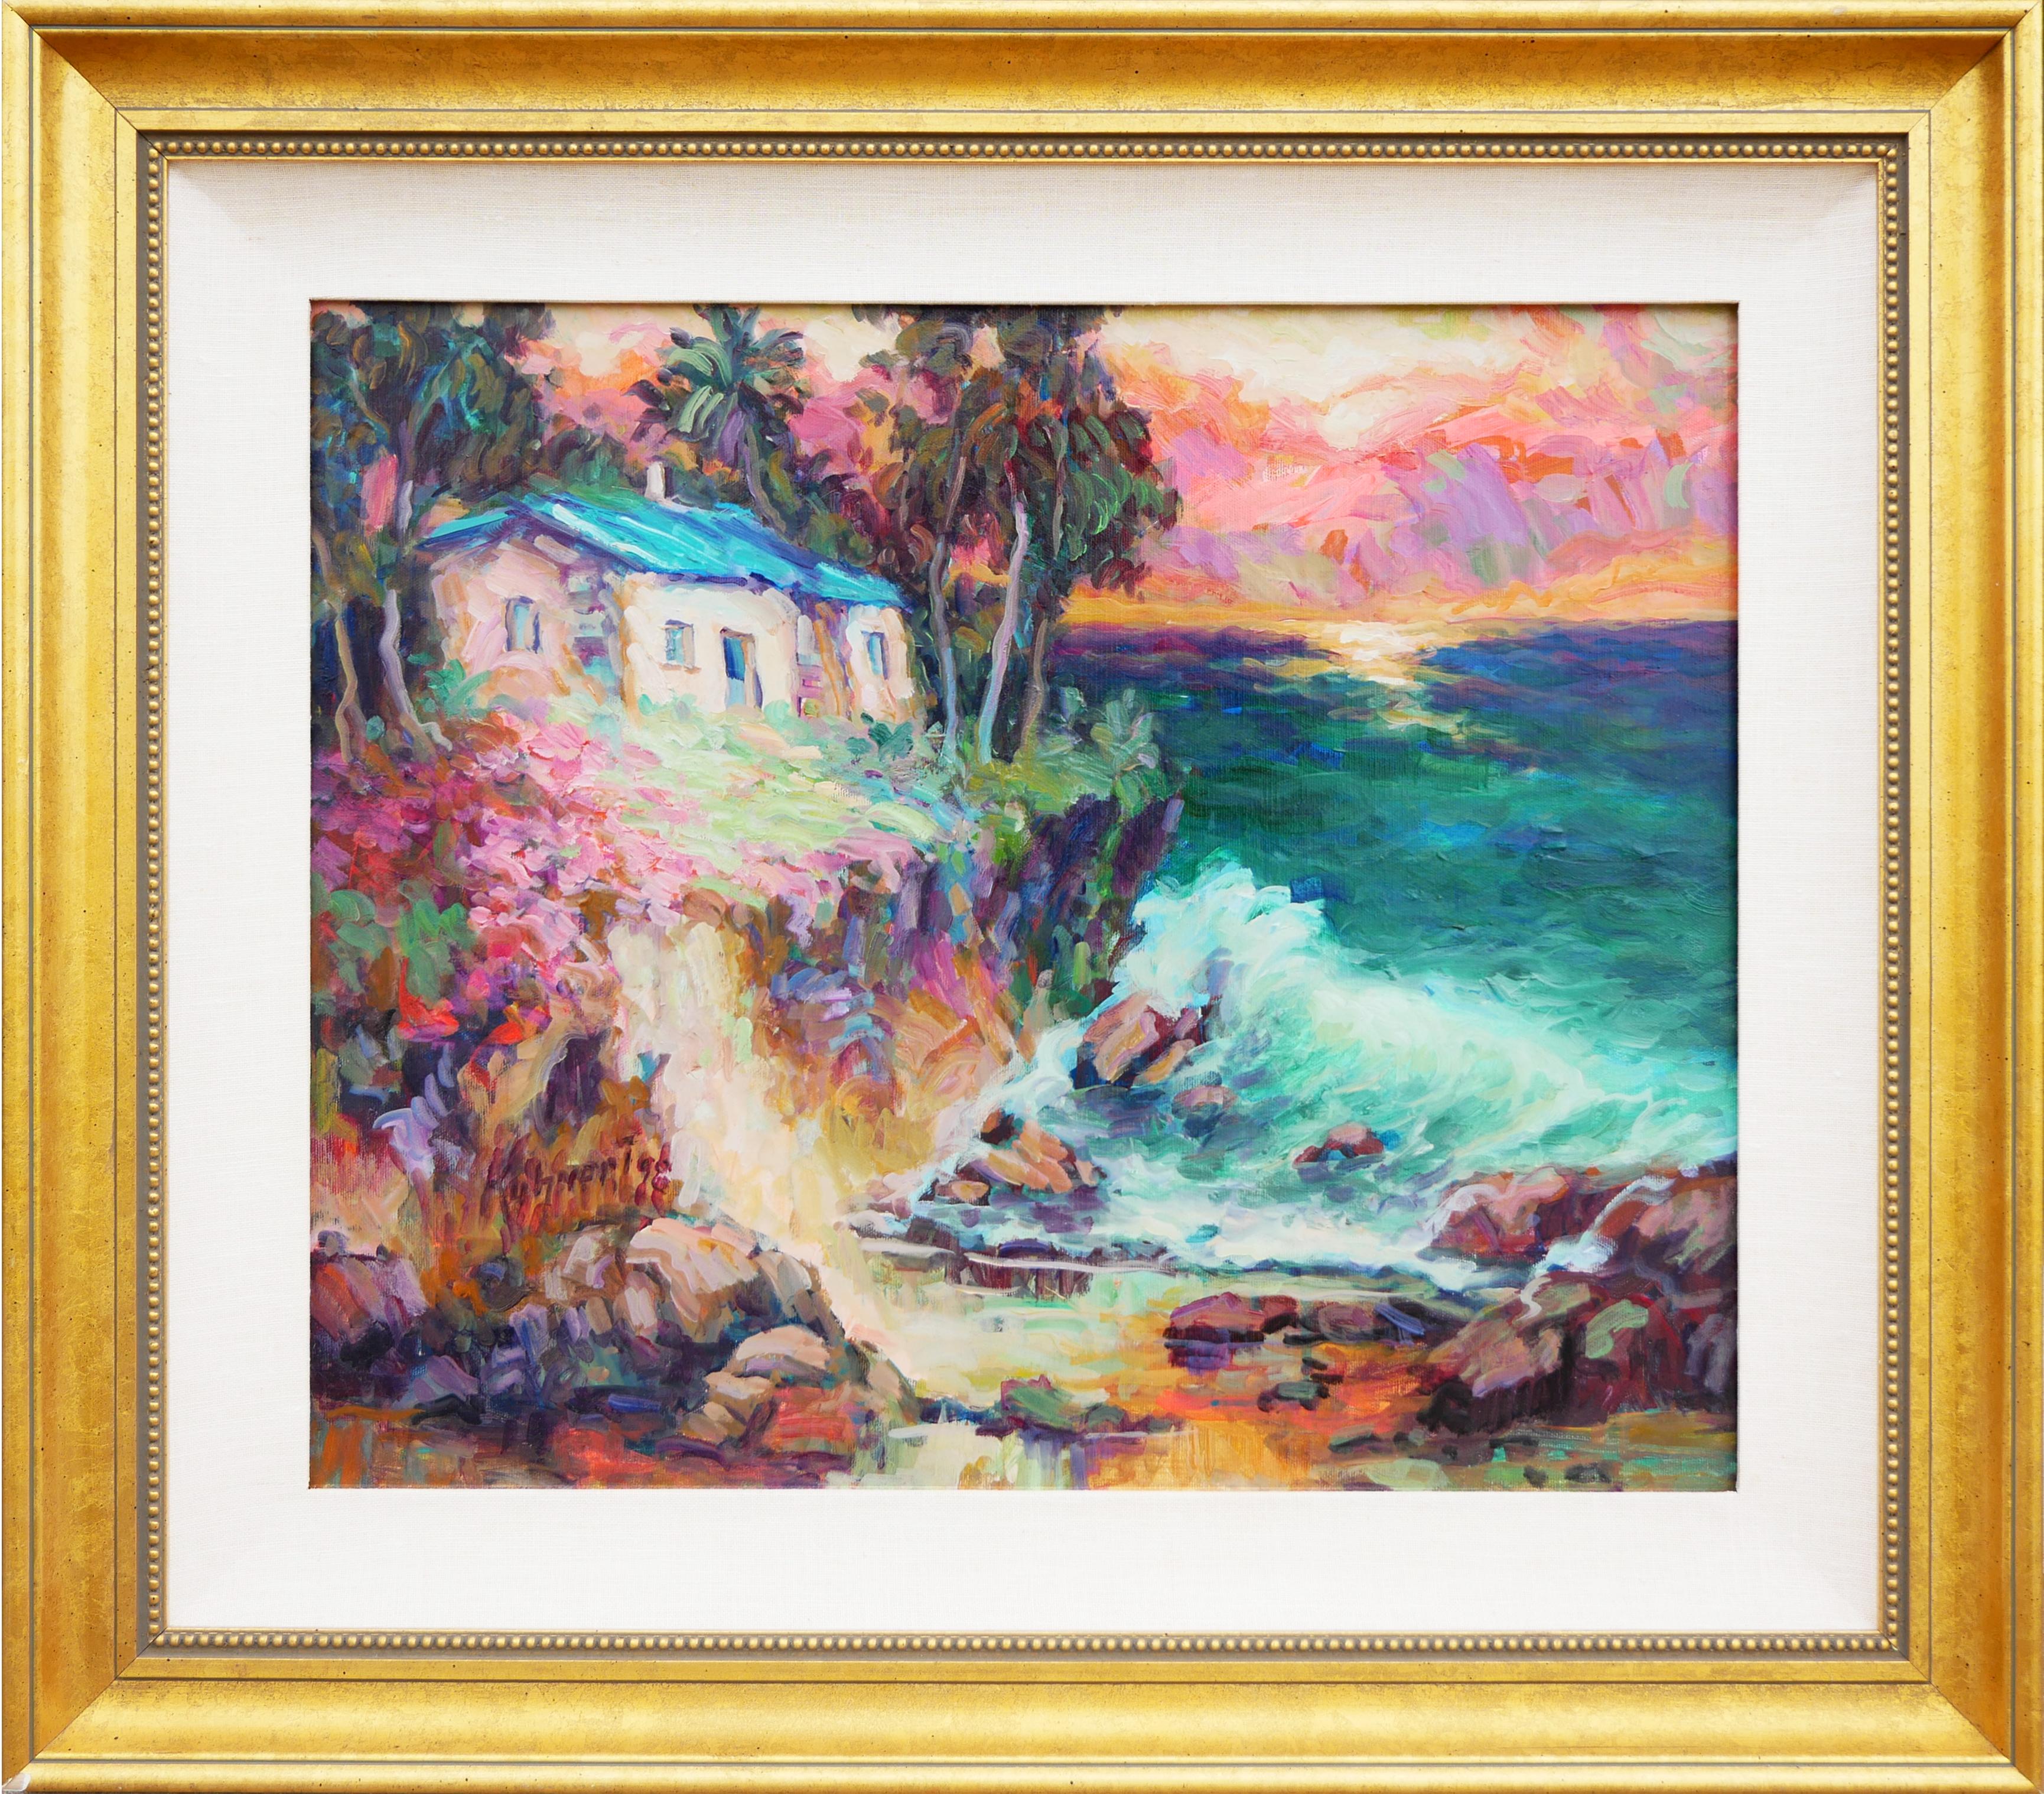 Manfred H. Kuhnert Abstract Painting - Pink, Teal, Blue, and Green Impressionist Crystal Cove at Laguna Beach Painting